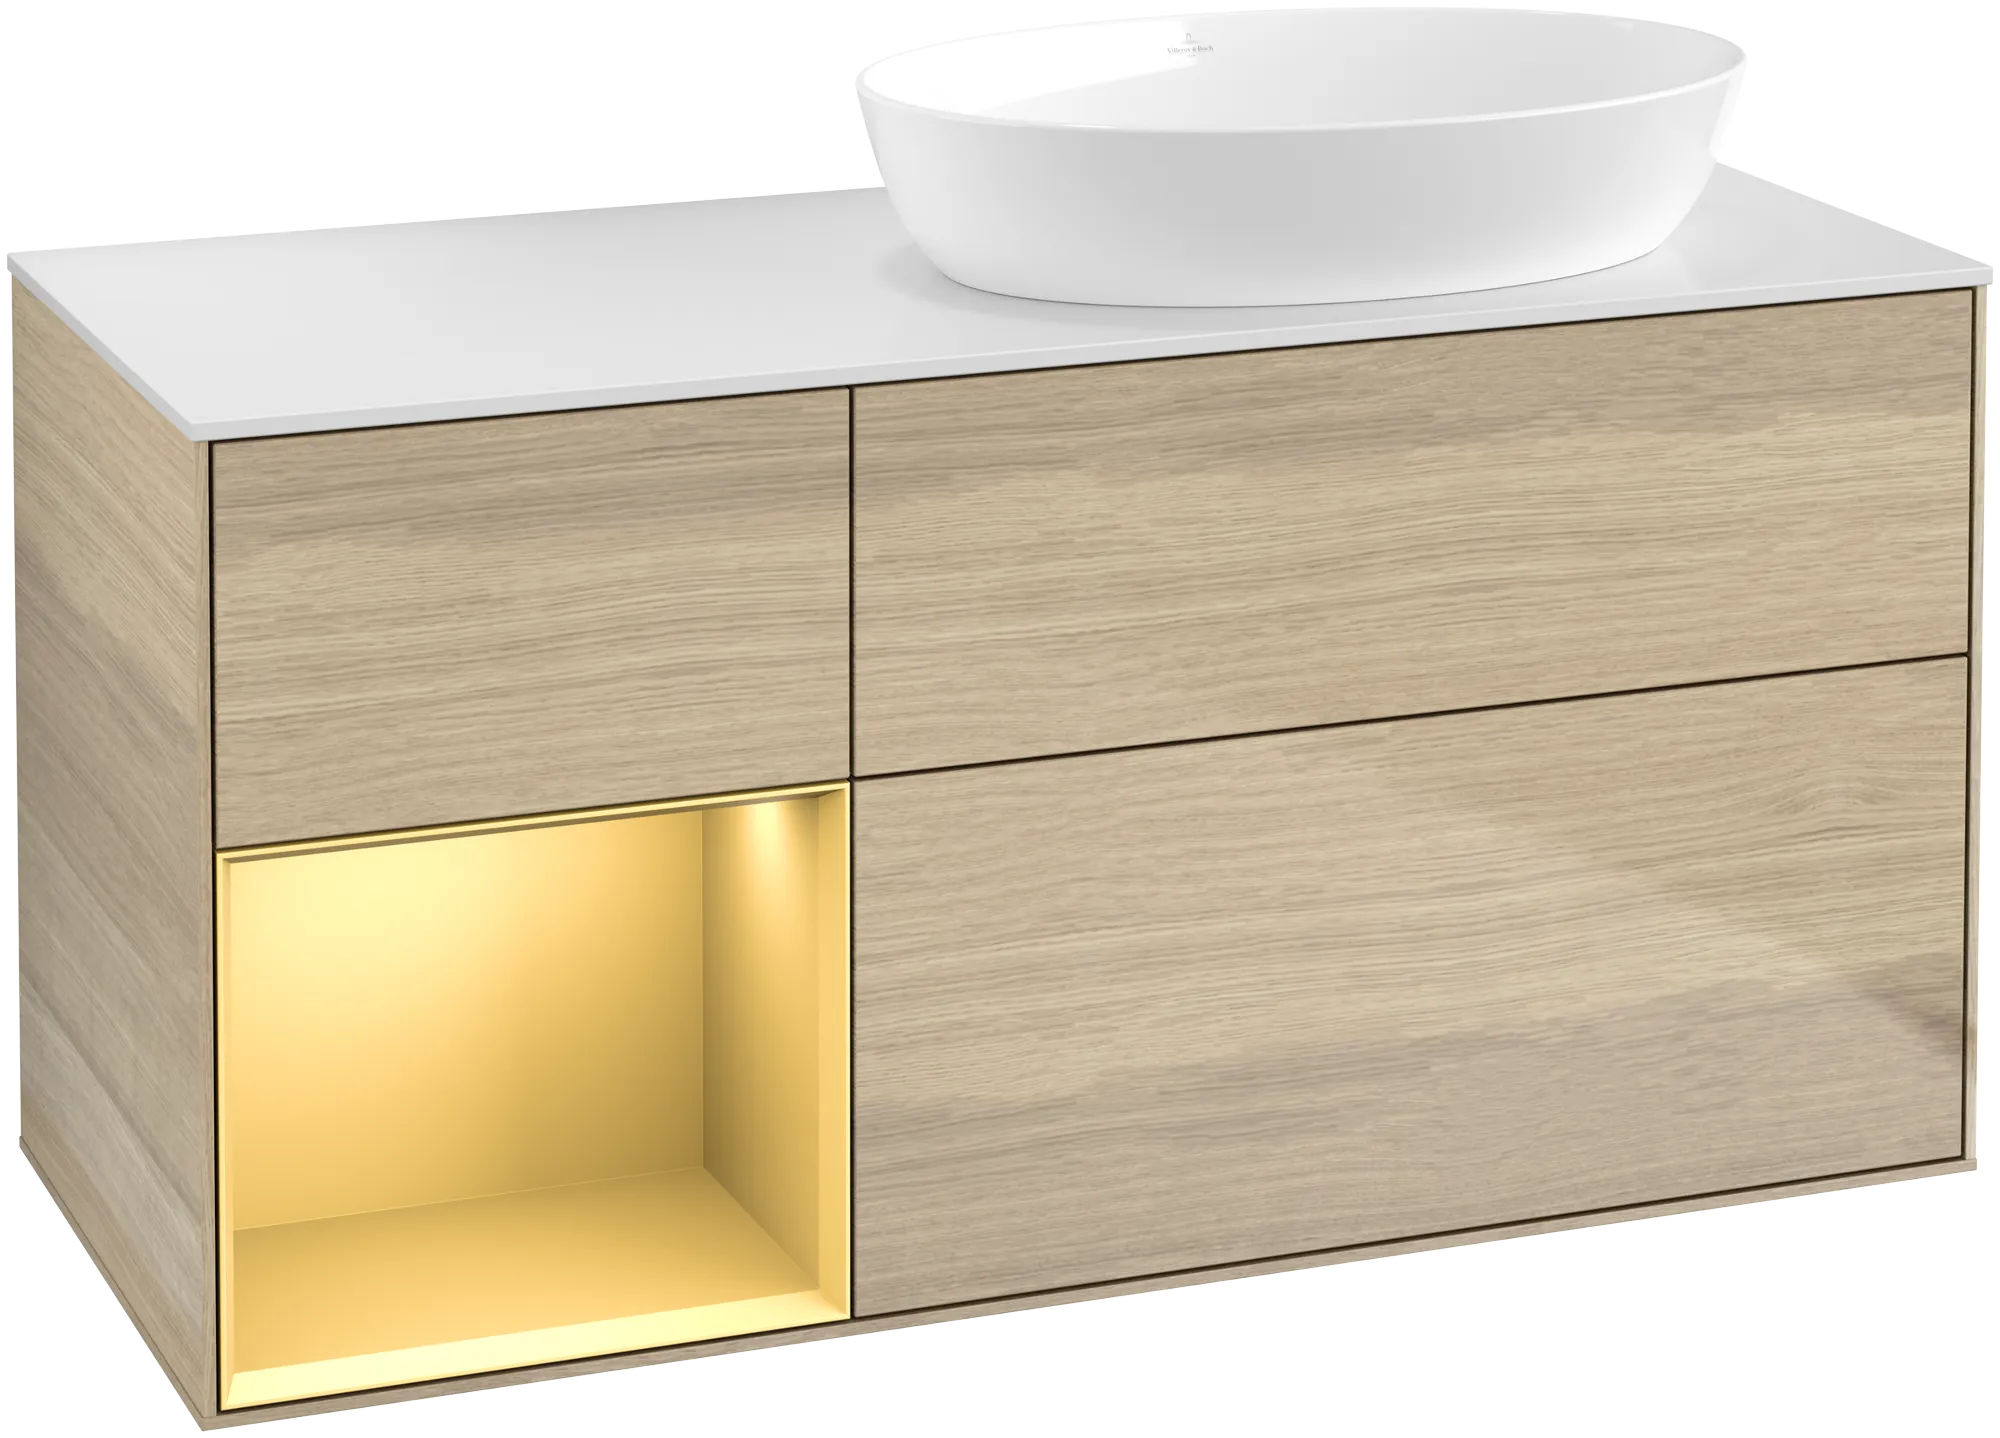 Picture of VILLEROY BOCH Finion Vanity unit, with lighting, 3 pull-out compartments, 1200 x 603 x 501 mm, Oak Veneer / Gold Matt Lacquer / Glass White Matt #GA41HFPC